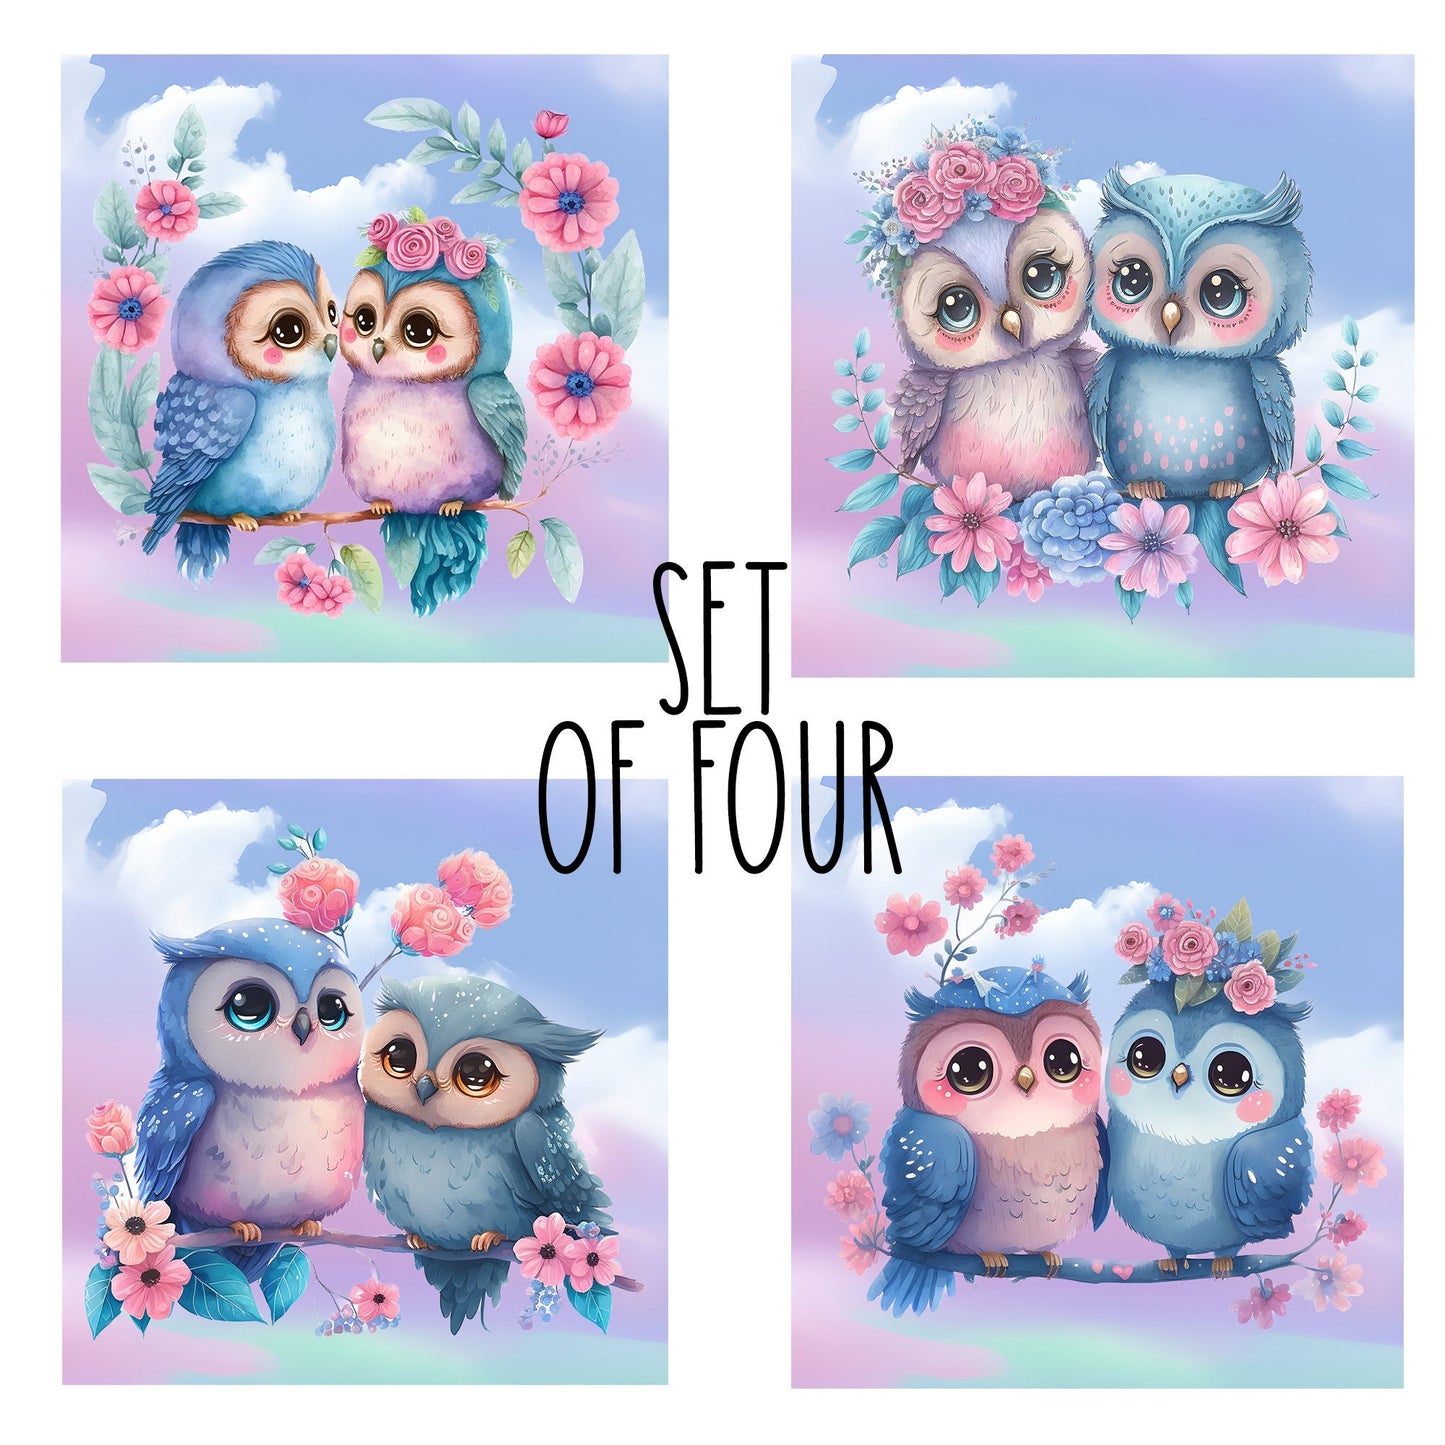 Cute Cartoon Owls In Love Decorative Ceramic Tile Set with Optional Easel Back - Available in 4 sizes - Set of 4